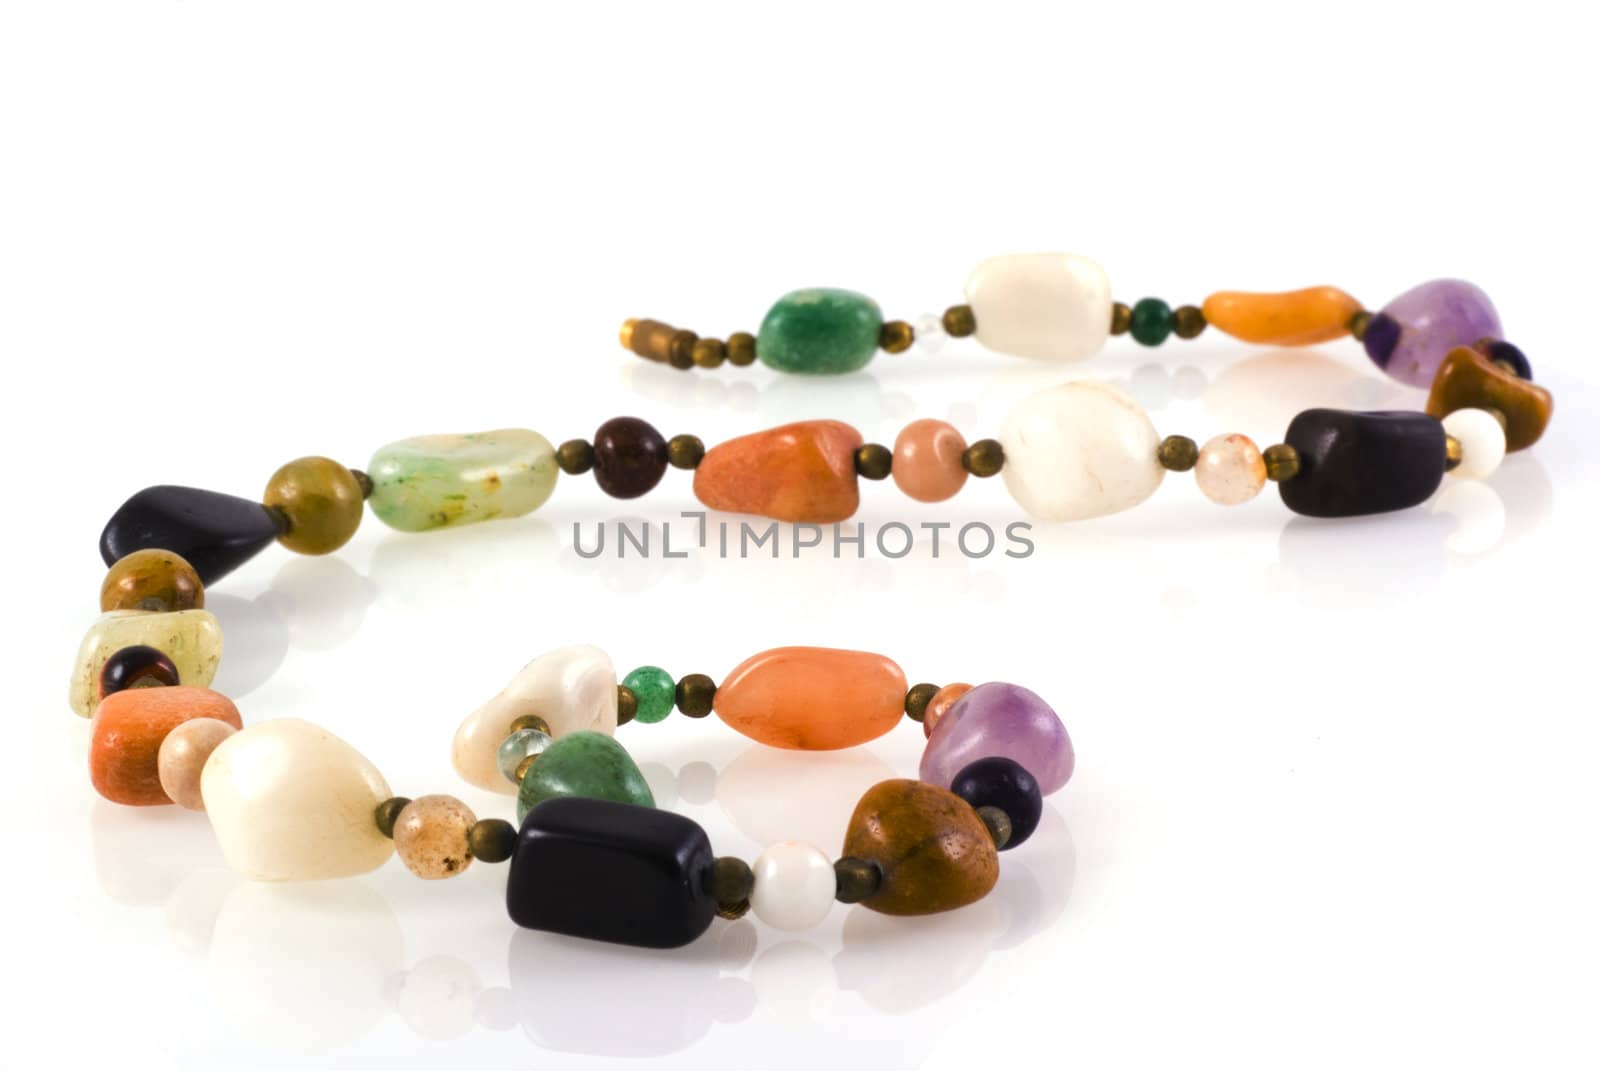 Necklace made of colorful natural stones isolated on white.